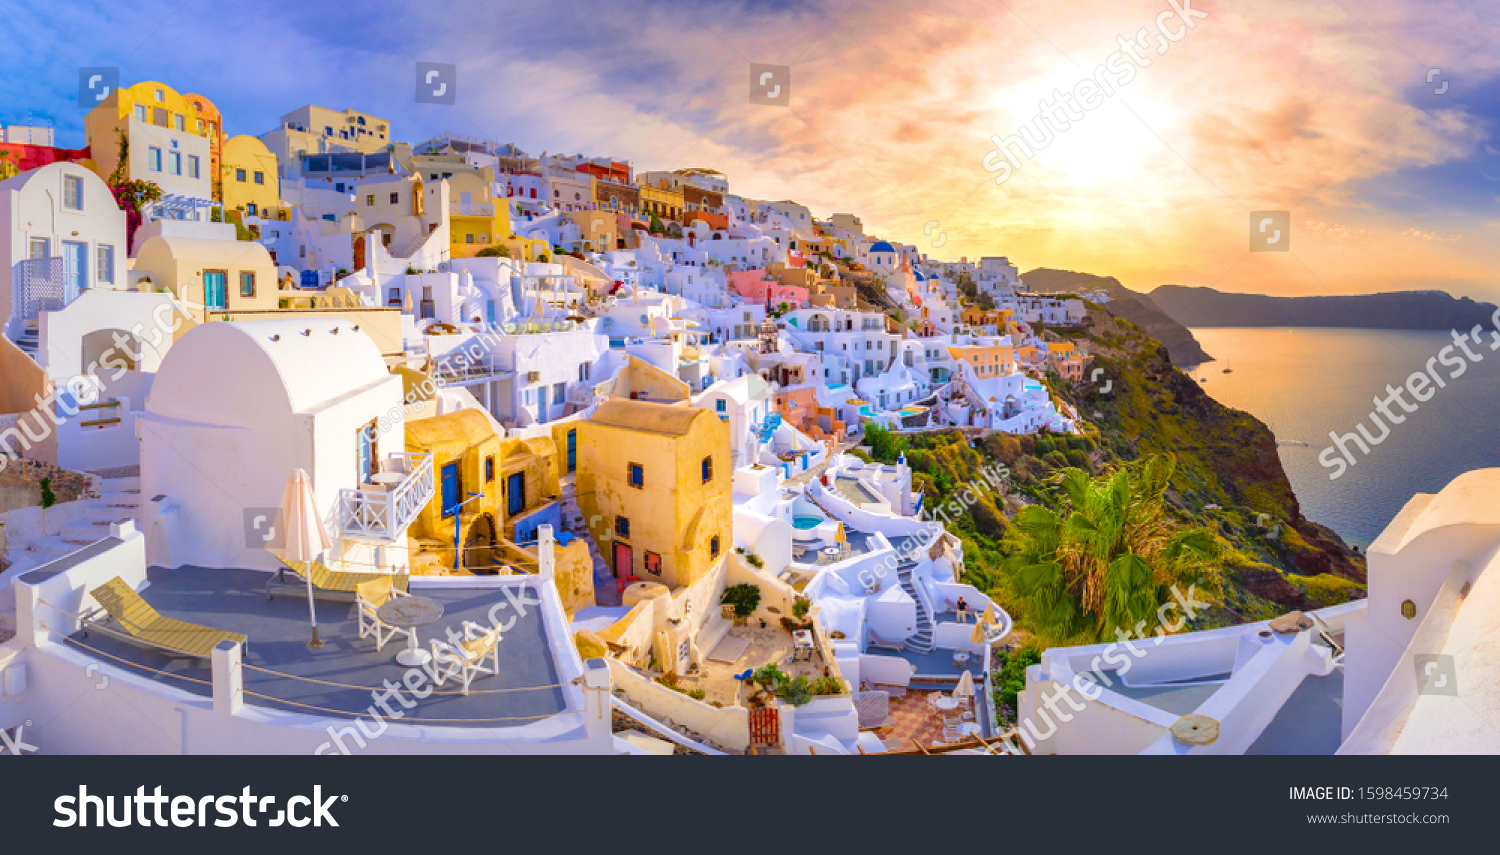 Oia town on Santorini island, Greece. Traditional and famous houses and churches with blue domes over the Caldera, Aegean sea #1598459734